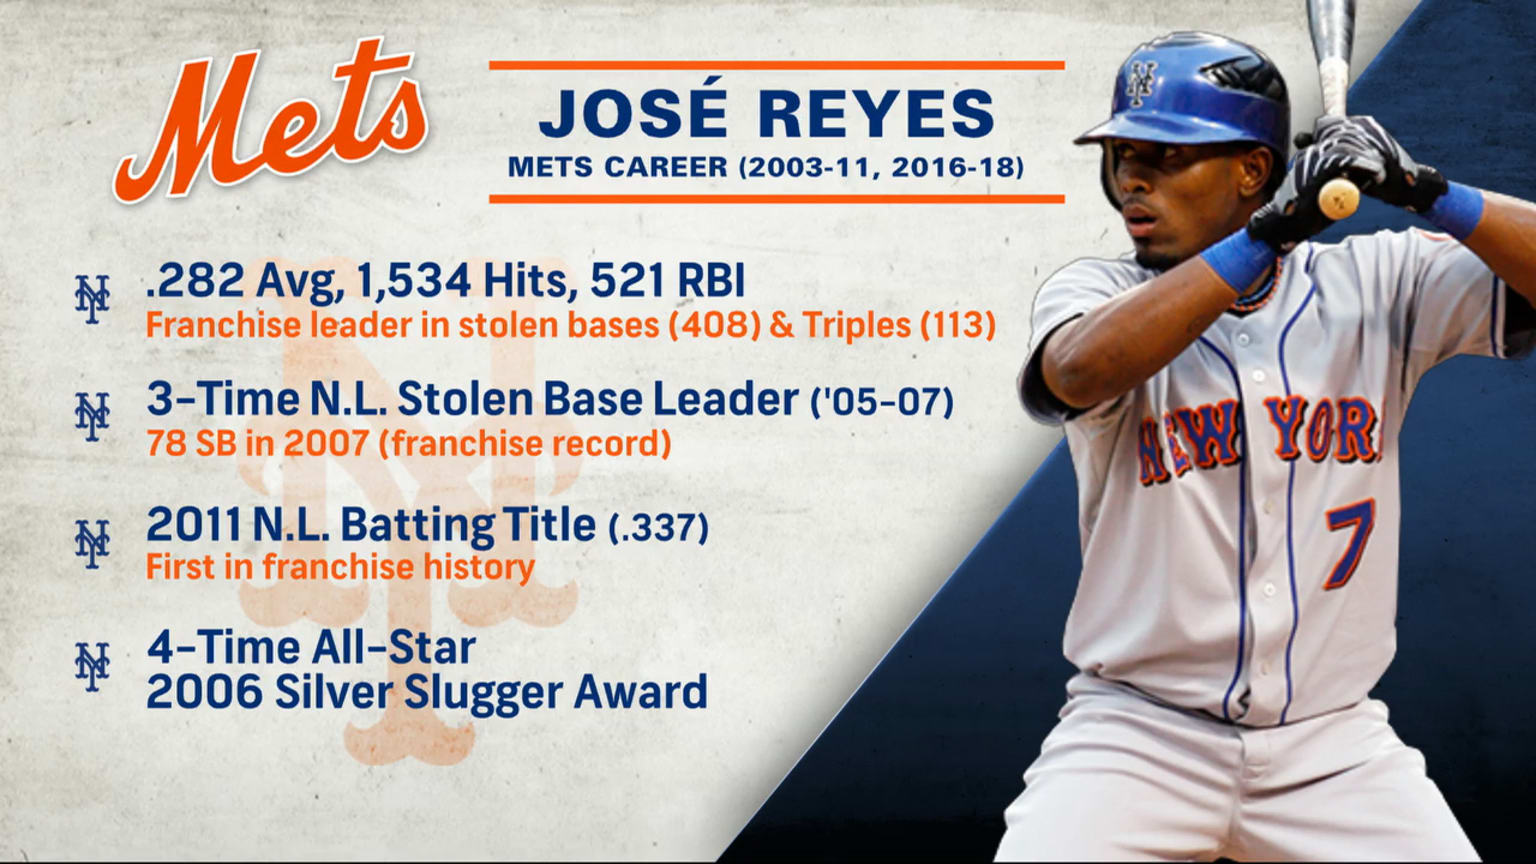 New York Mets player Jose Reyes announces retirement after 16